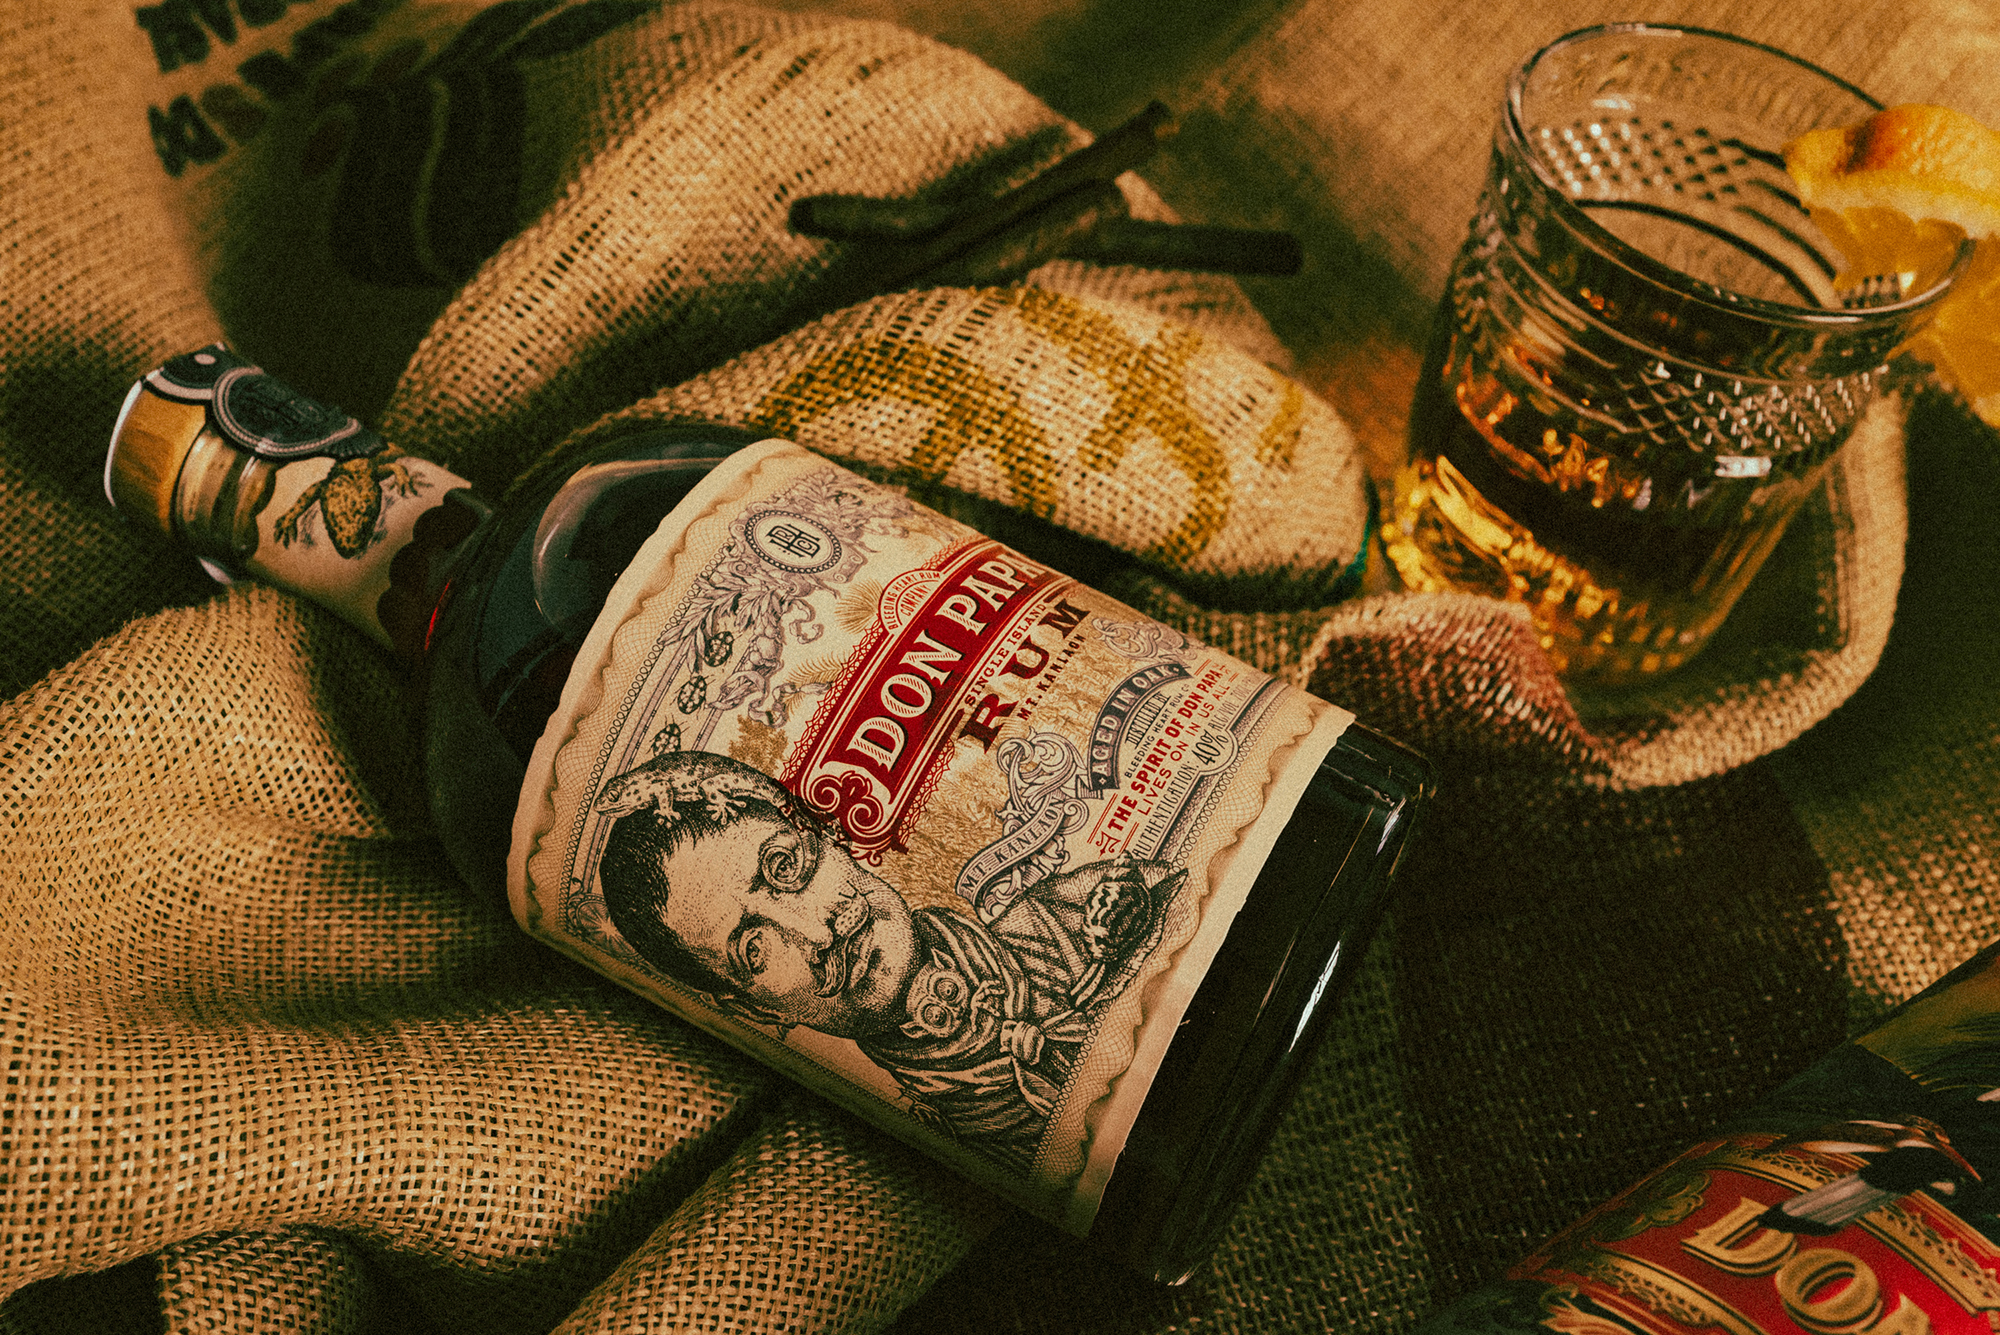 Branding, Product photography, branding photography, advertising photography, product stills, key visual, Don Papa, Advertising, Commercial Campaign